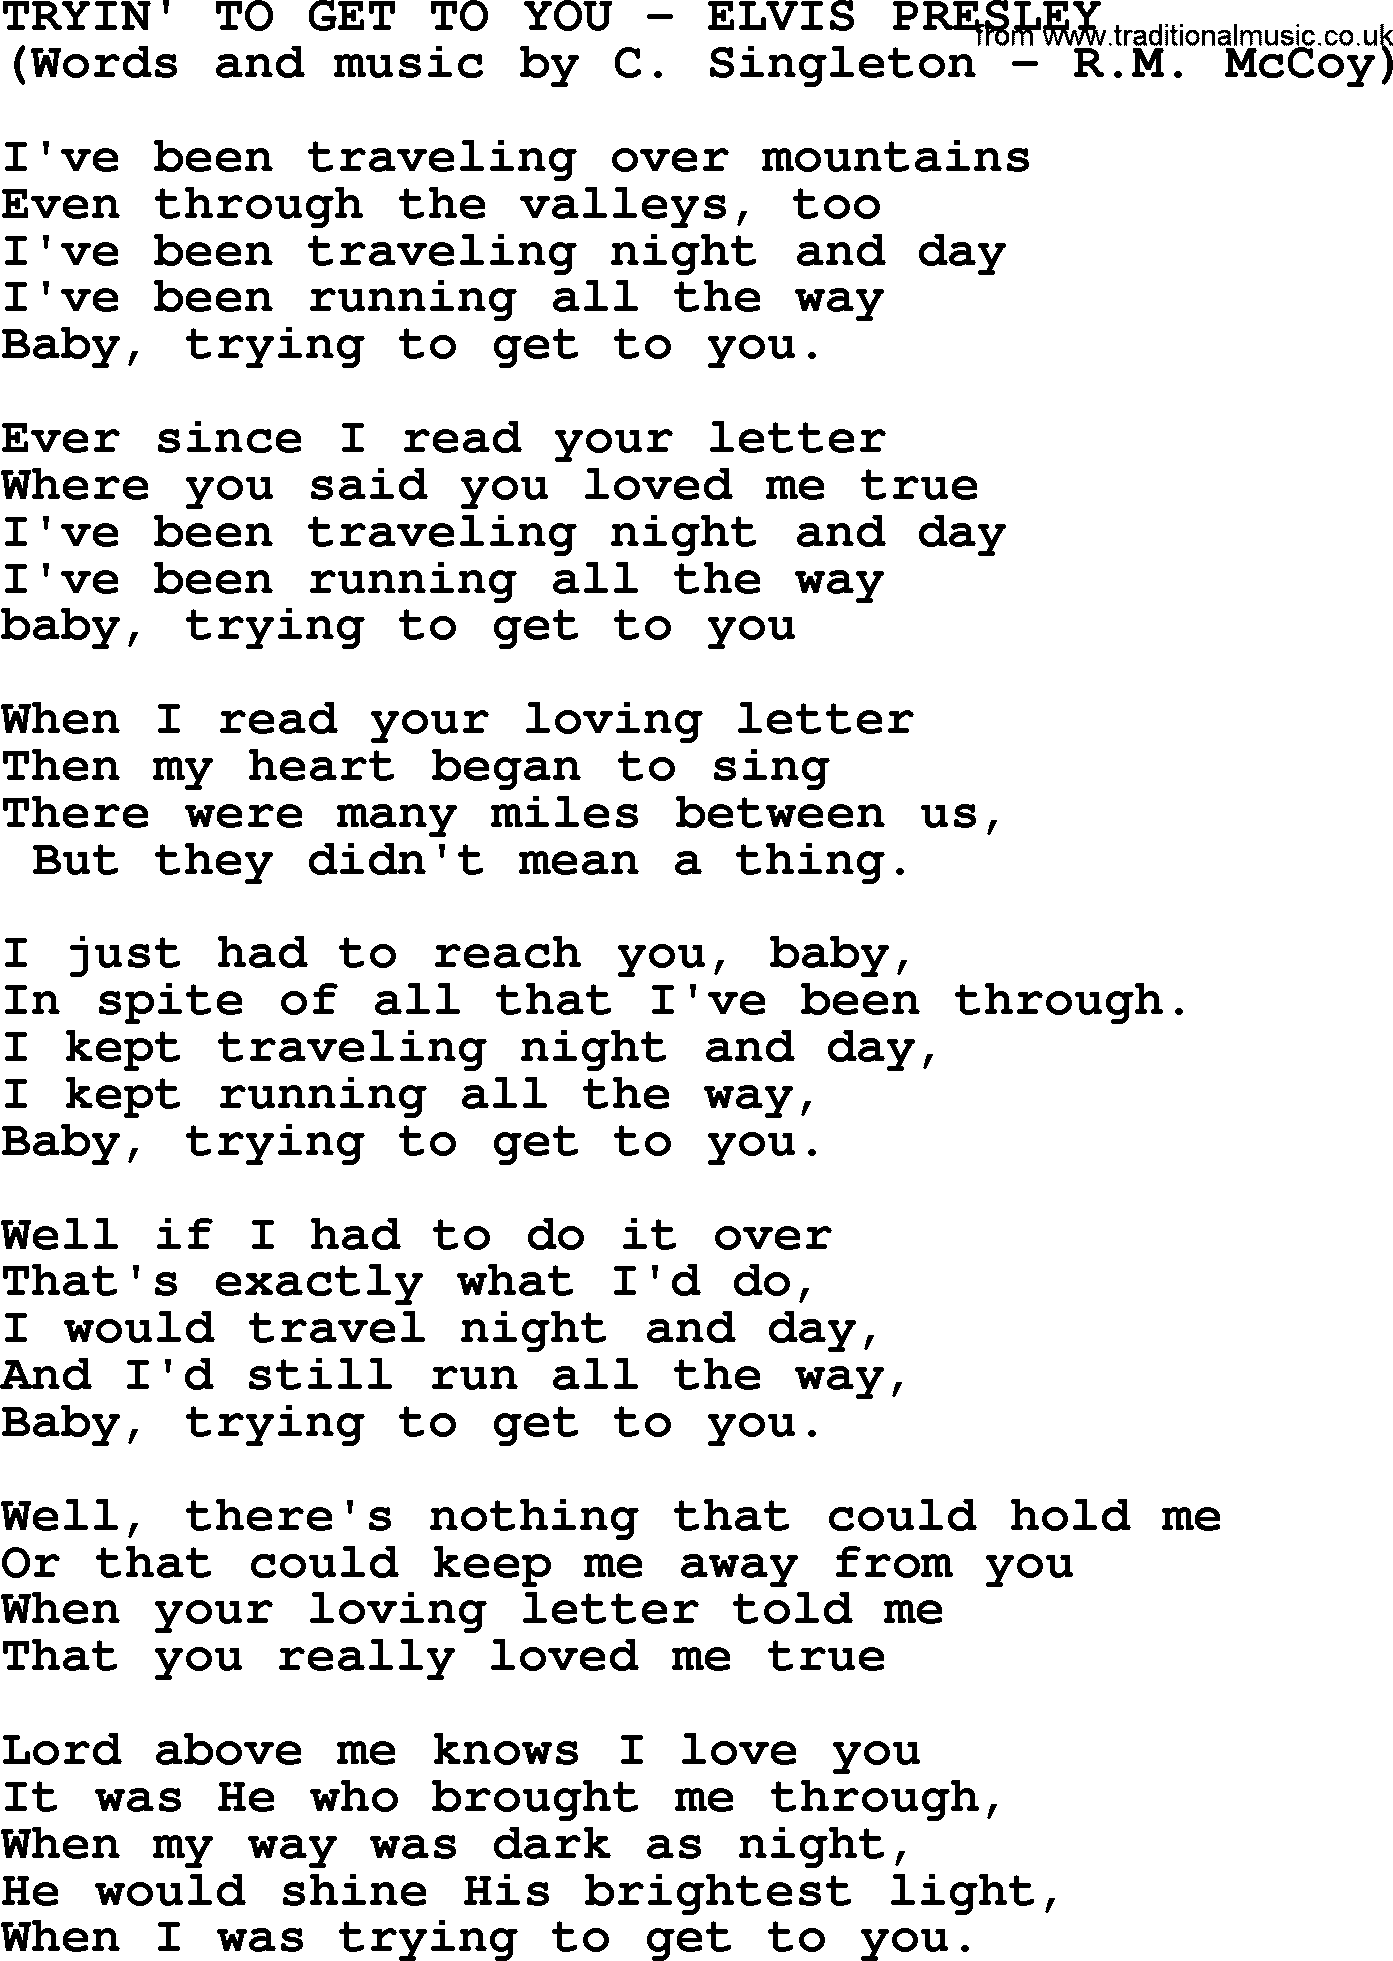 Elvis Presley song: Tryin' To Get To You lyrics